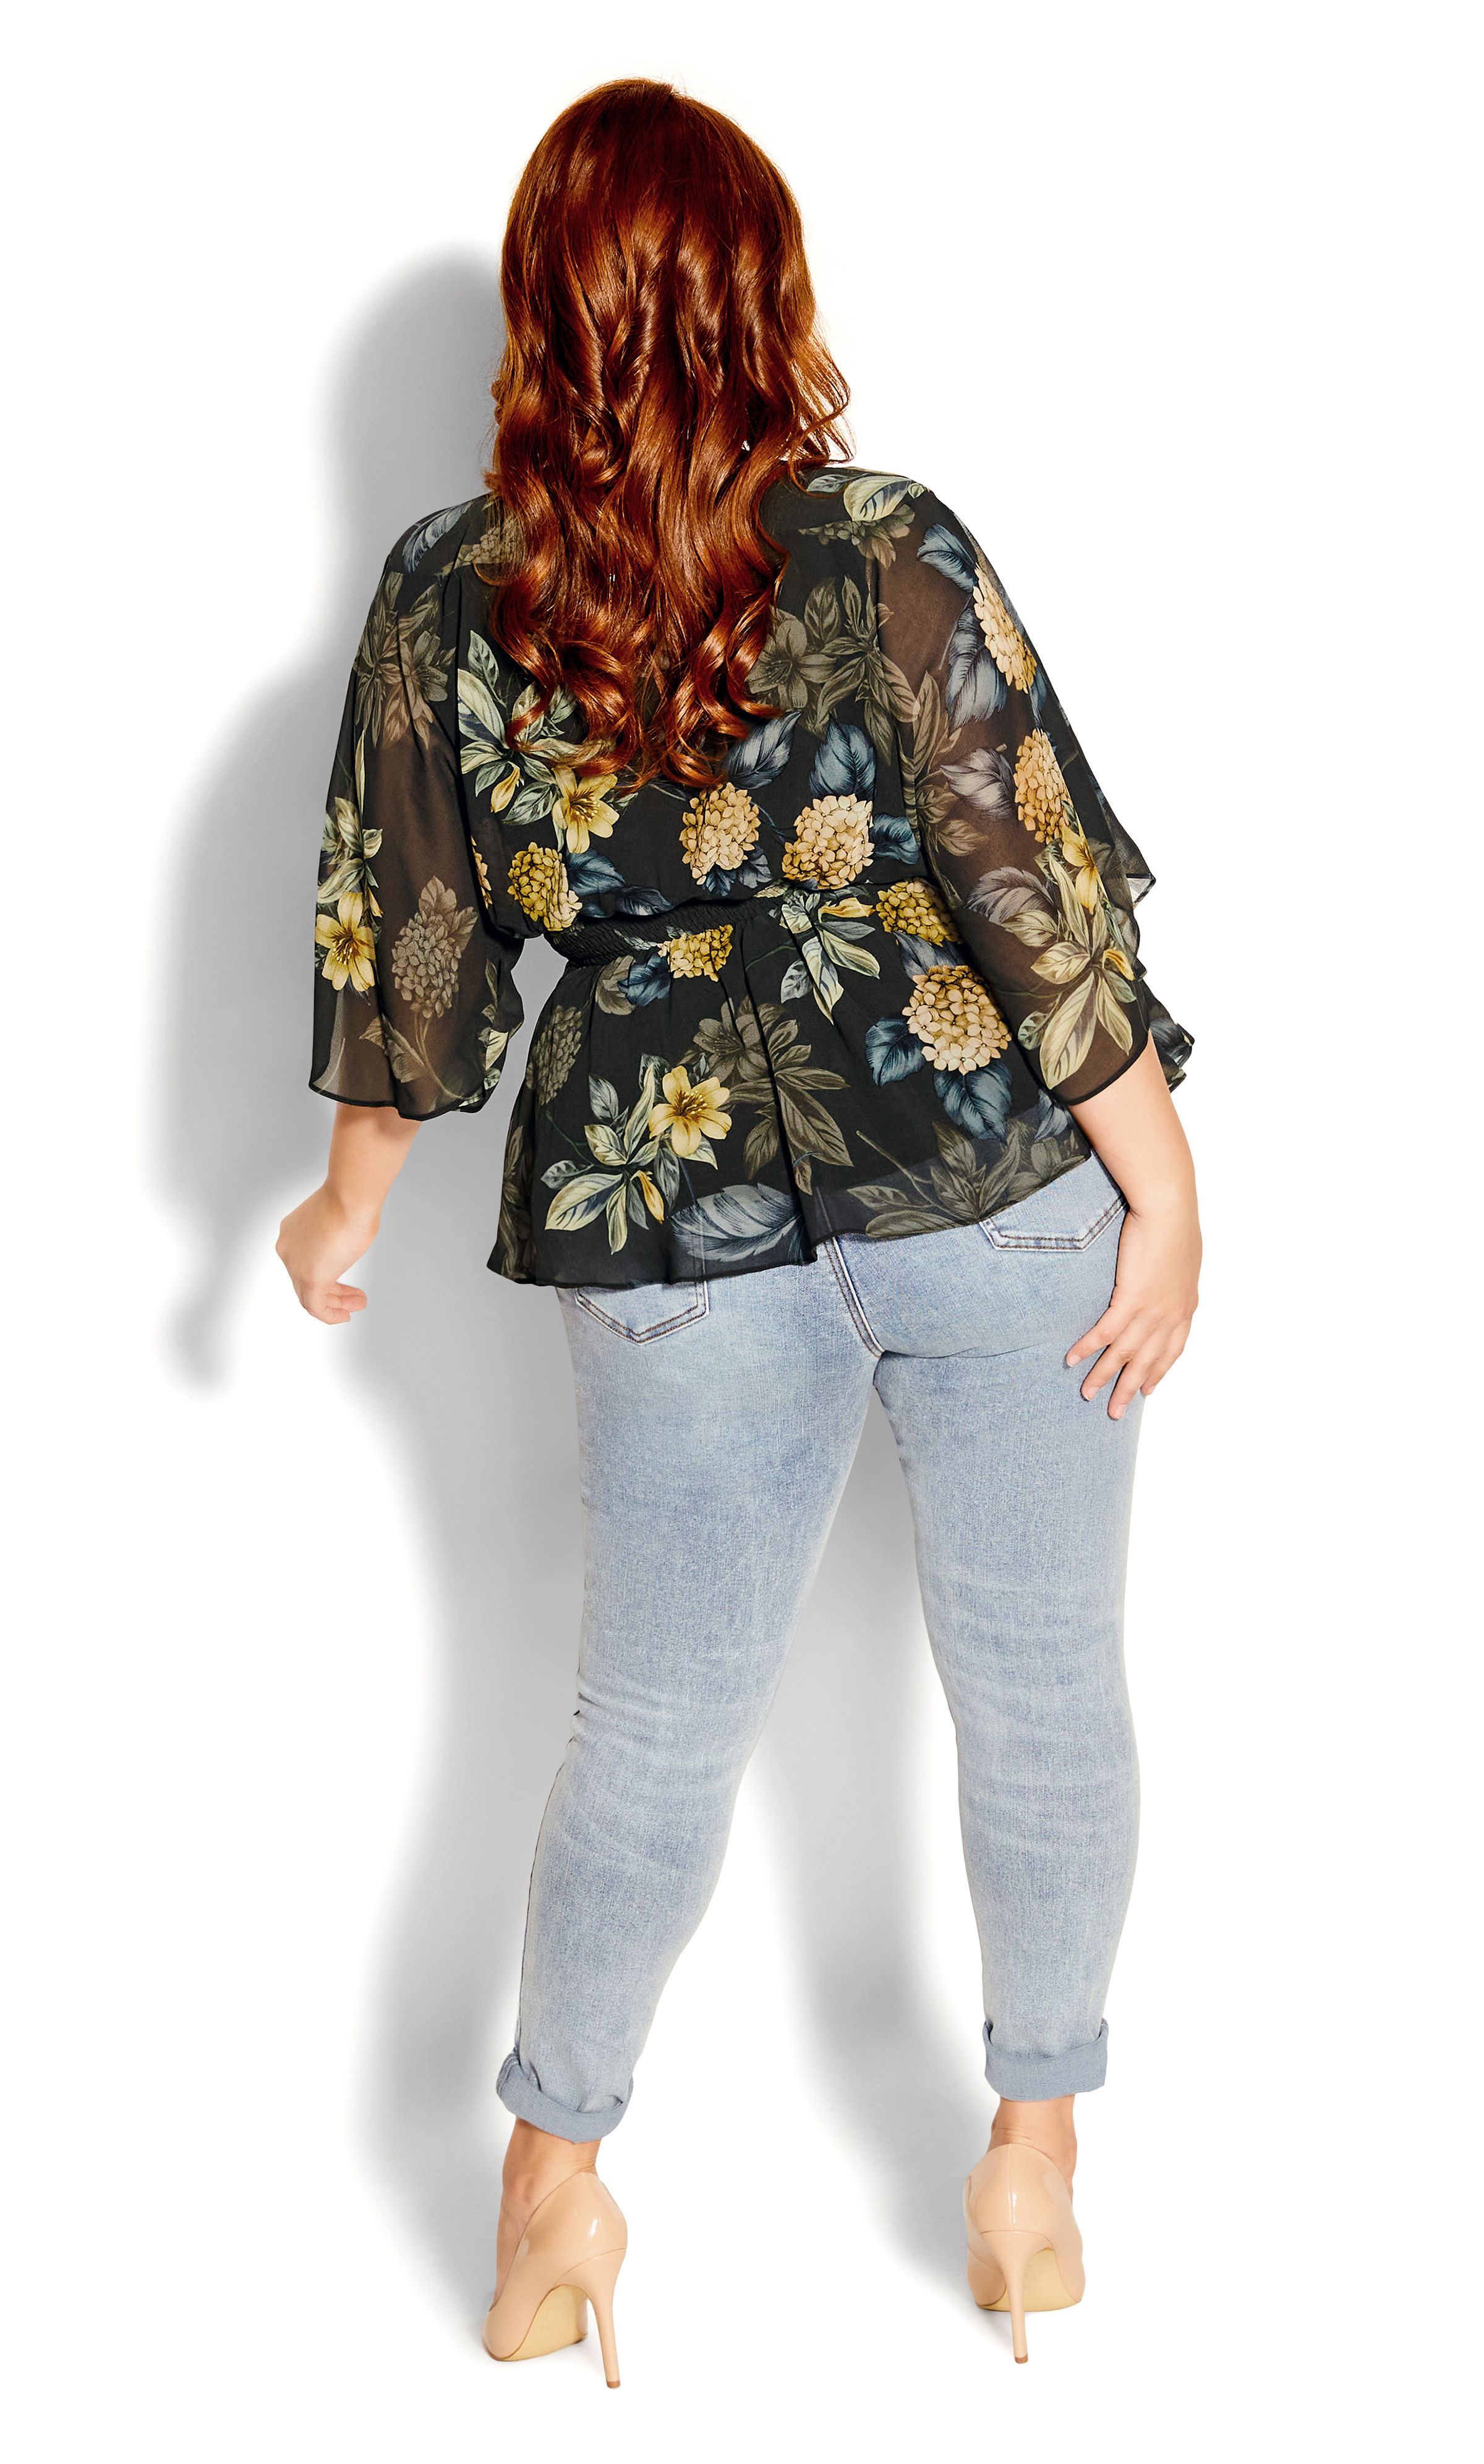 Wrap your curves in lavish florals with the Golden Hydrangea Shirt. With a flattering faux wrap finish and feminine flare sleeves, you'll be rocking this statement top all year round. Key Features Include: - Faux wrap V-neckline - Three-quarter flared sleeves - Elasticated back waist - Fit & flare silhouette - Attached self-tie waist belt - Pull over style - Fully lined - Hip length Style this with a trendy block heel and your favourite dark jeans for a classic day-to-night look.